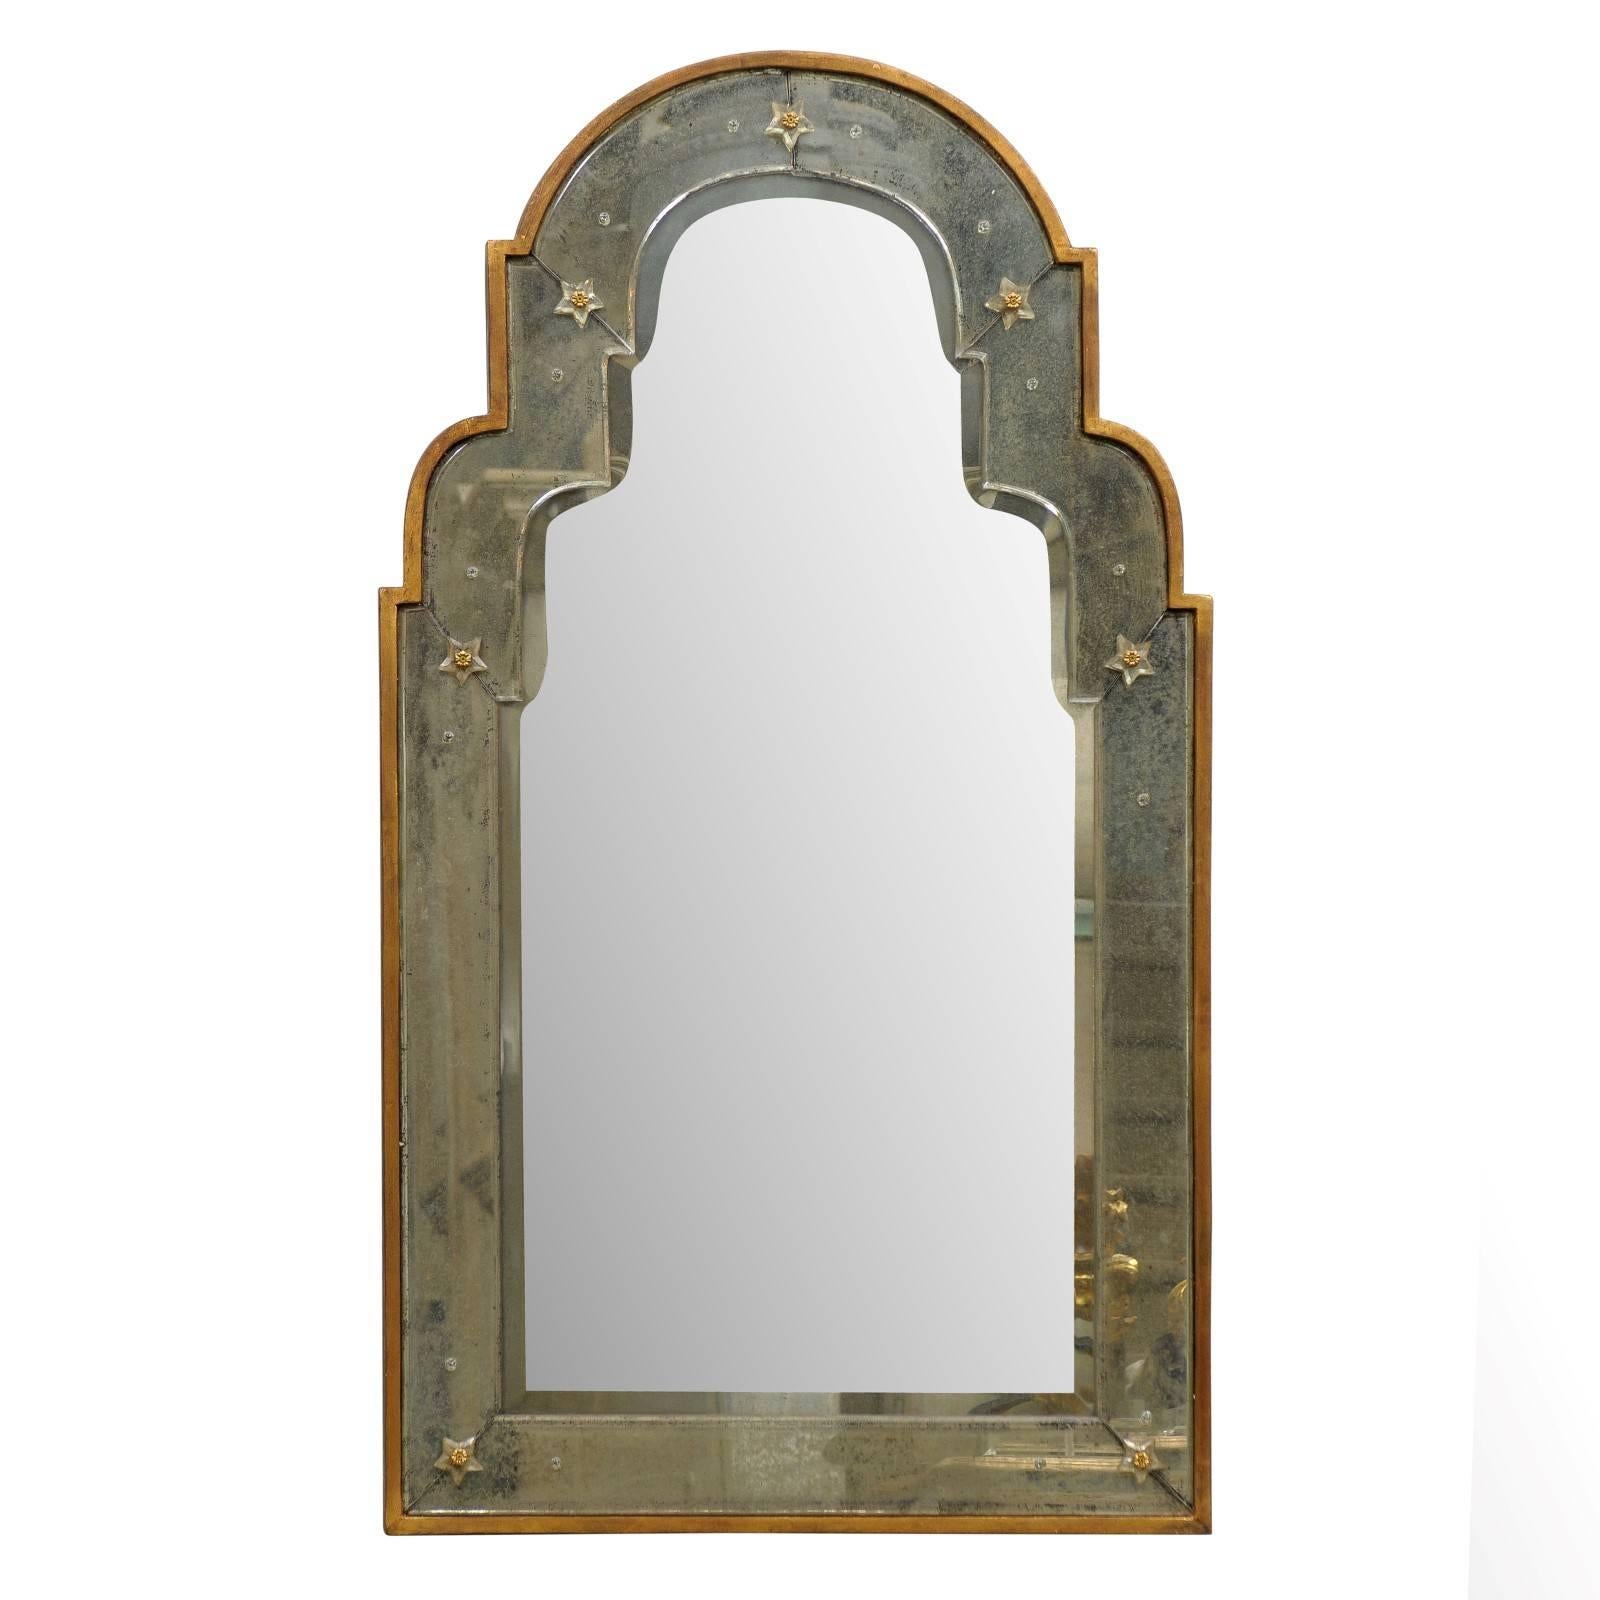 Paris Venetian Style Mirror with Bonnet Type Crest and Gilded Frame